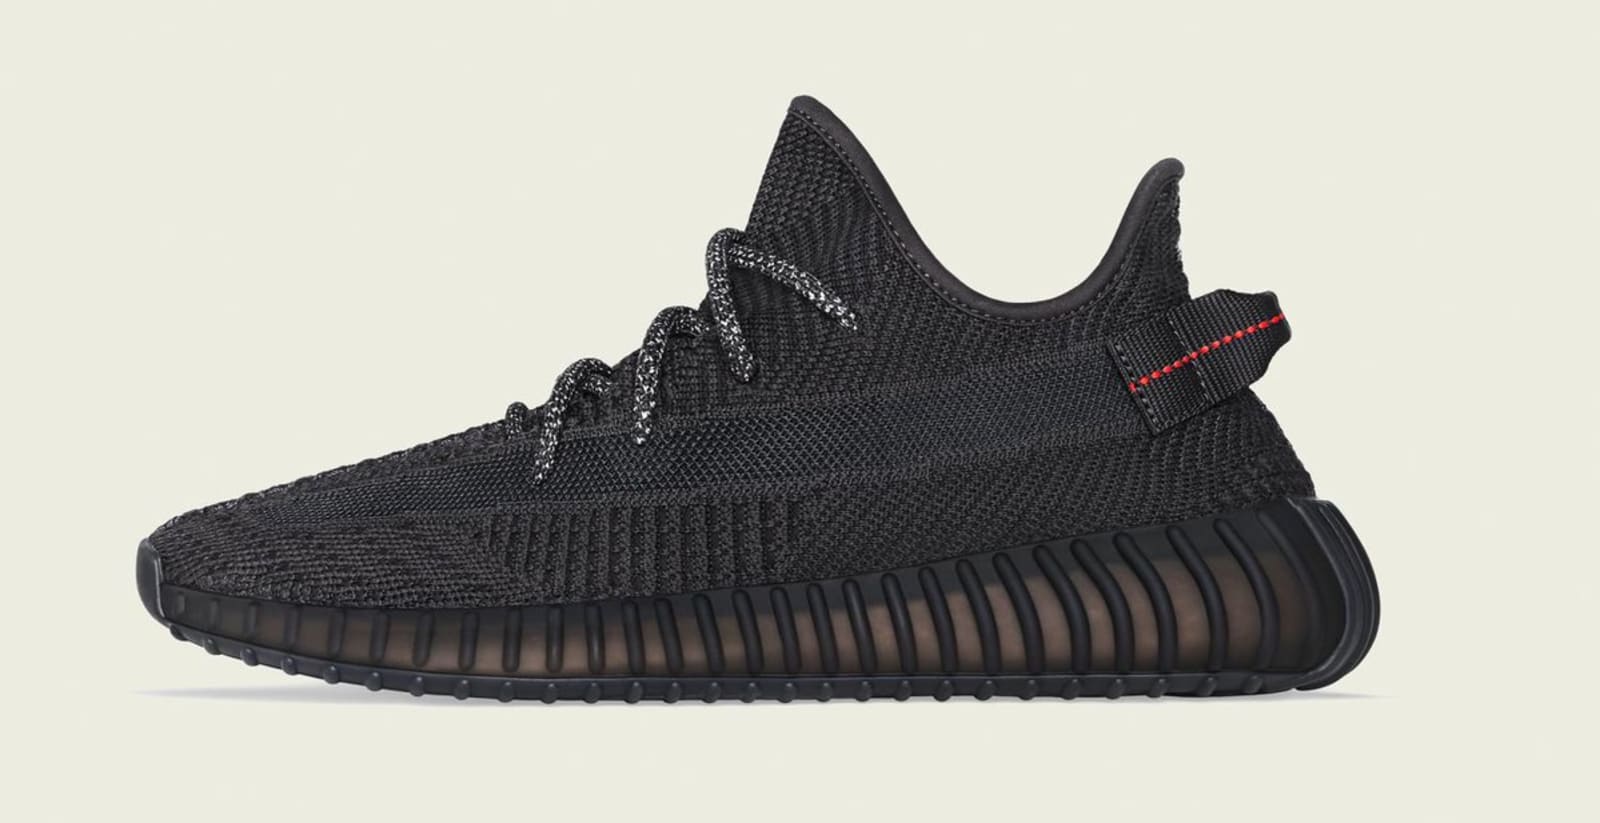 Adidas Yeezy Boost 350 V2 &quot;Black&quot; Restocking For Black Friday: Details